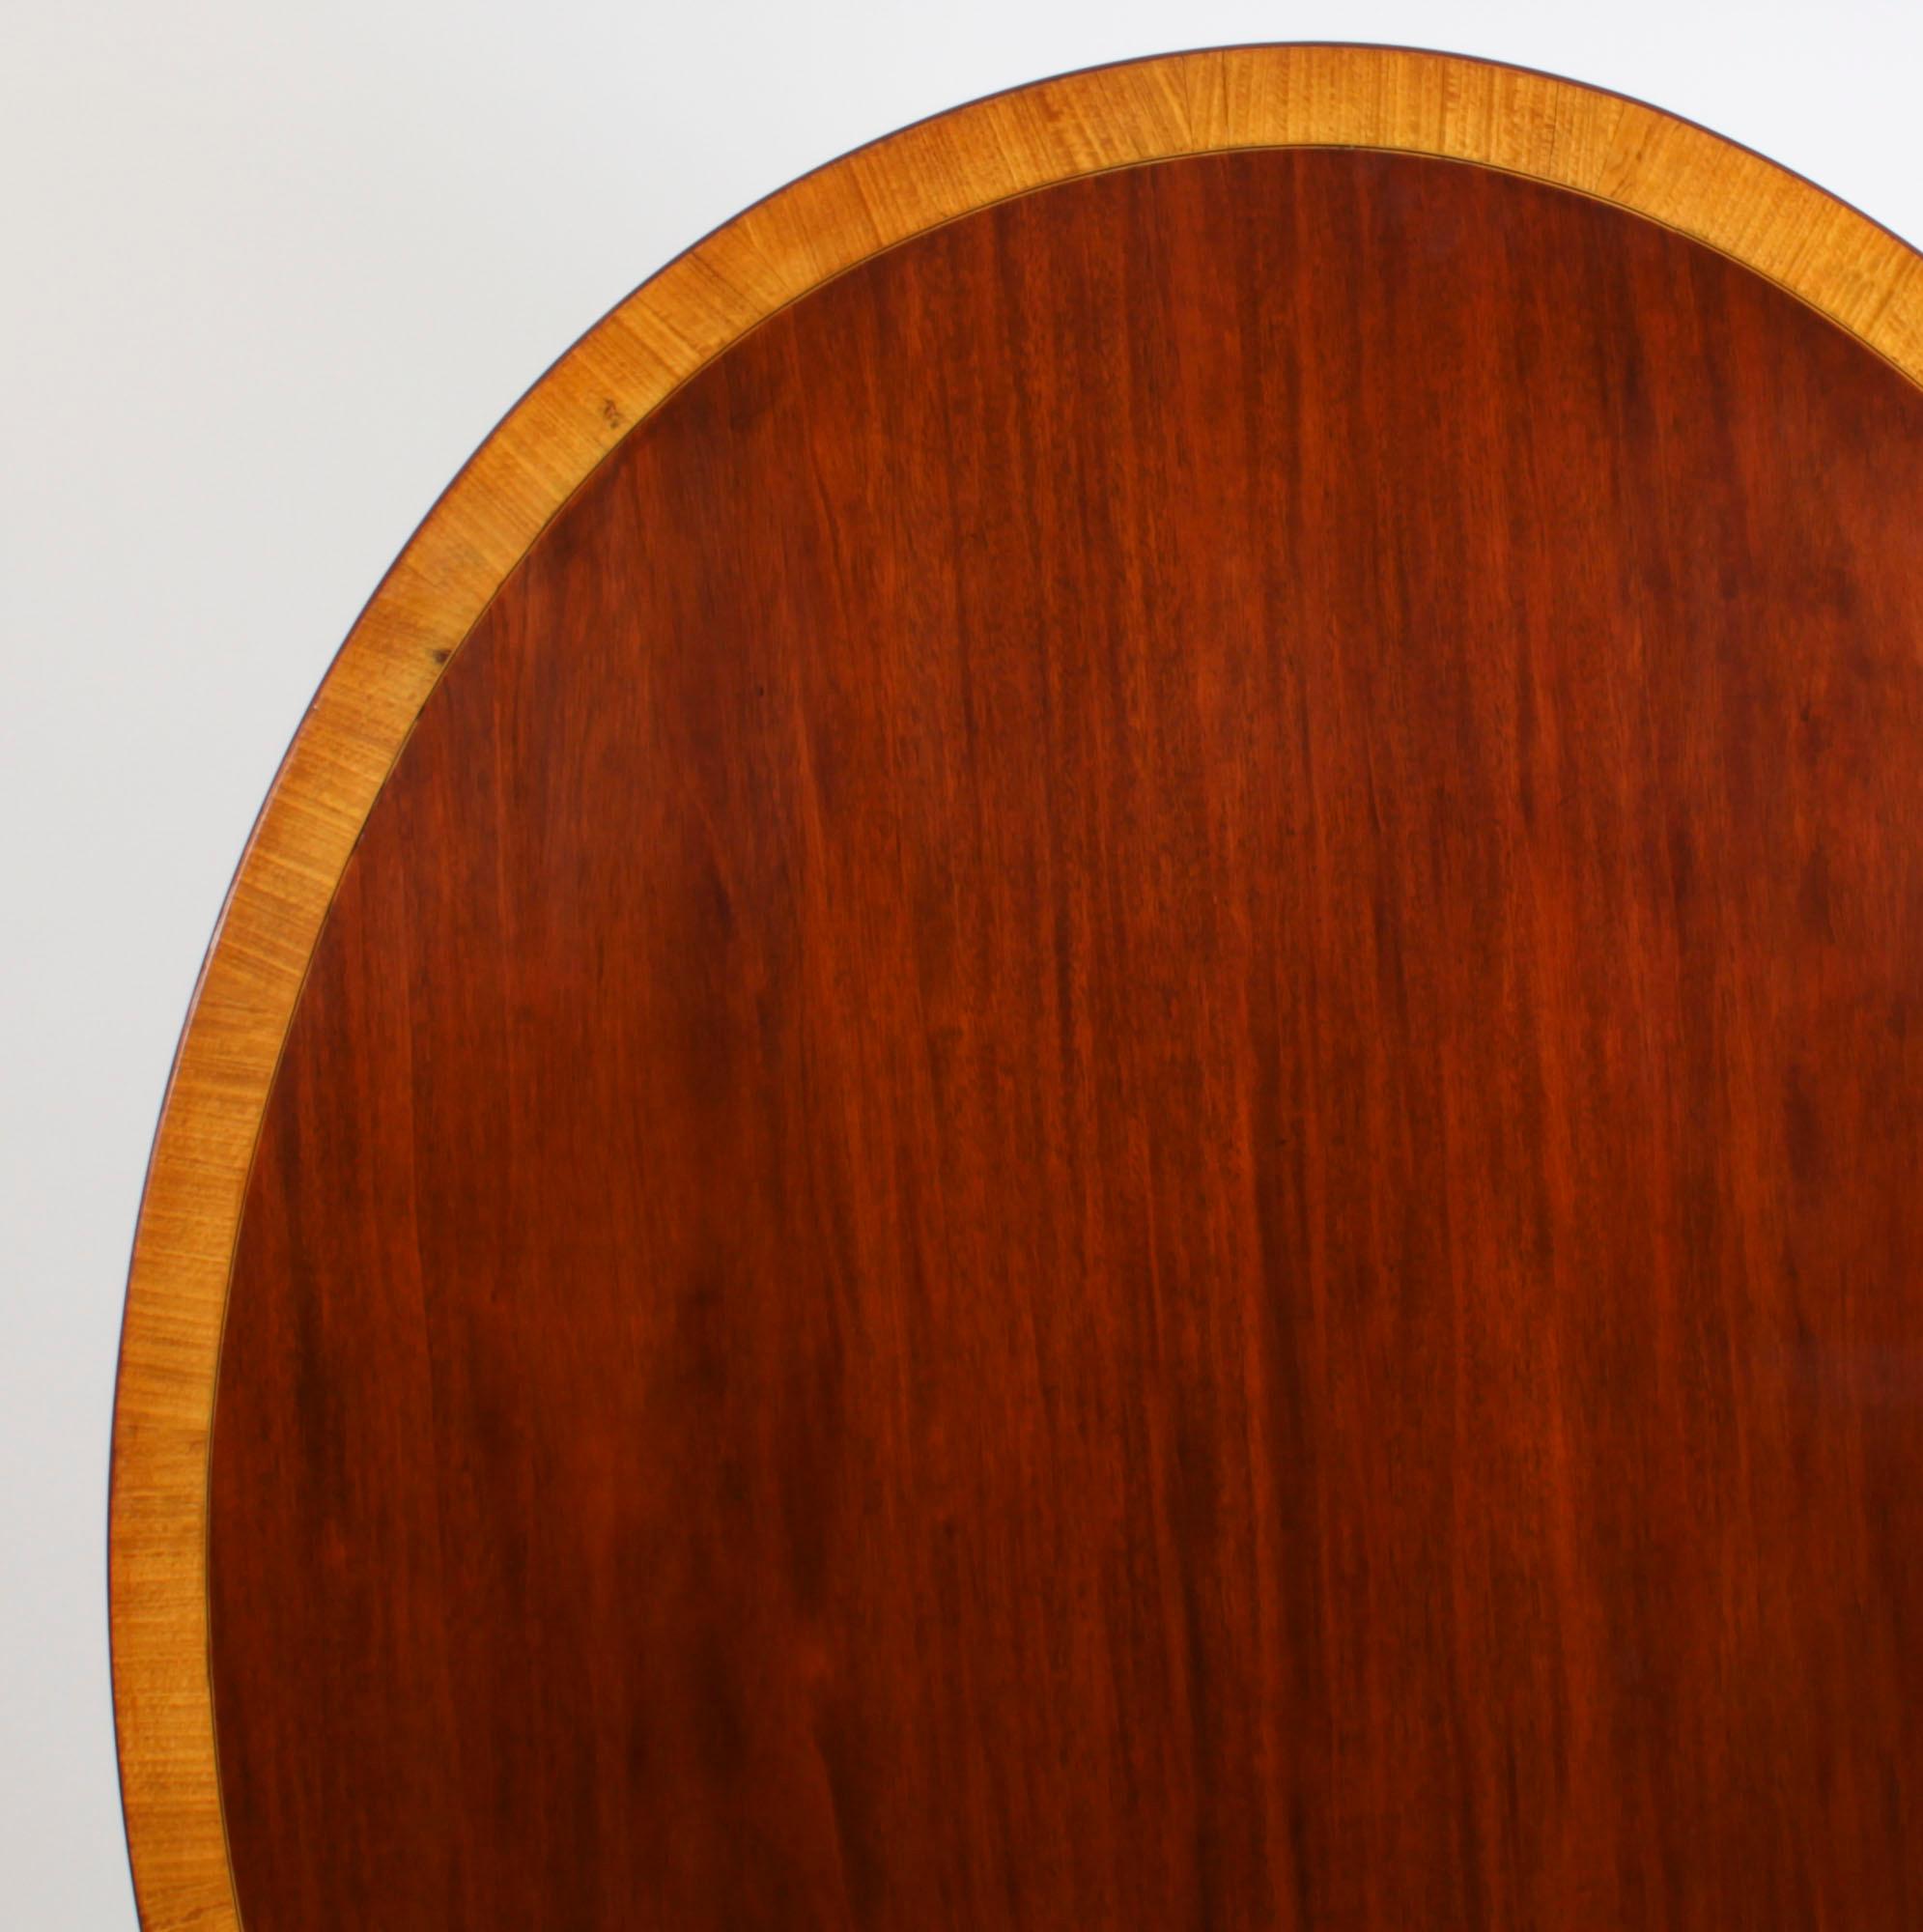 Antique Oval Mahogany Tilt Top Dining Table, Early 20th Century In Good Condition For Sale In London, GB